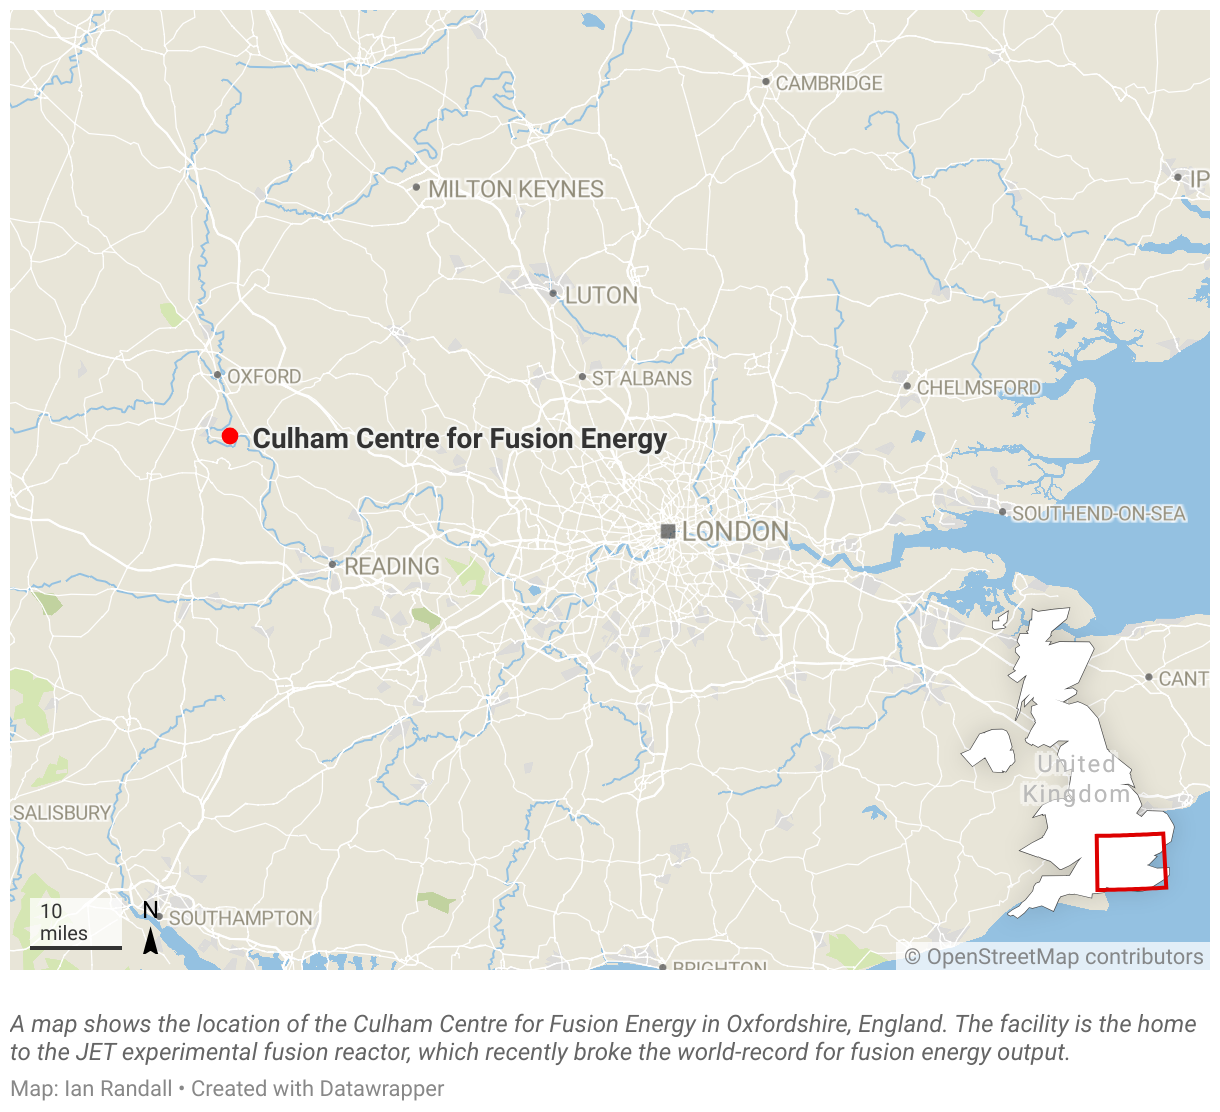 A map shows the location of the Culham Centre for Fusion Energy in Oxfordshire, England.